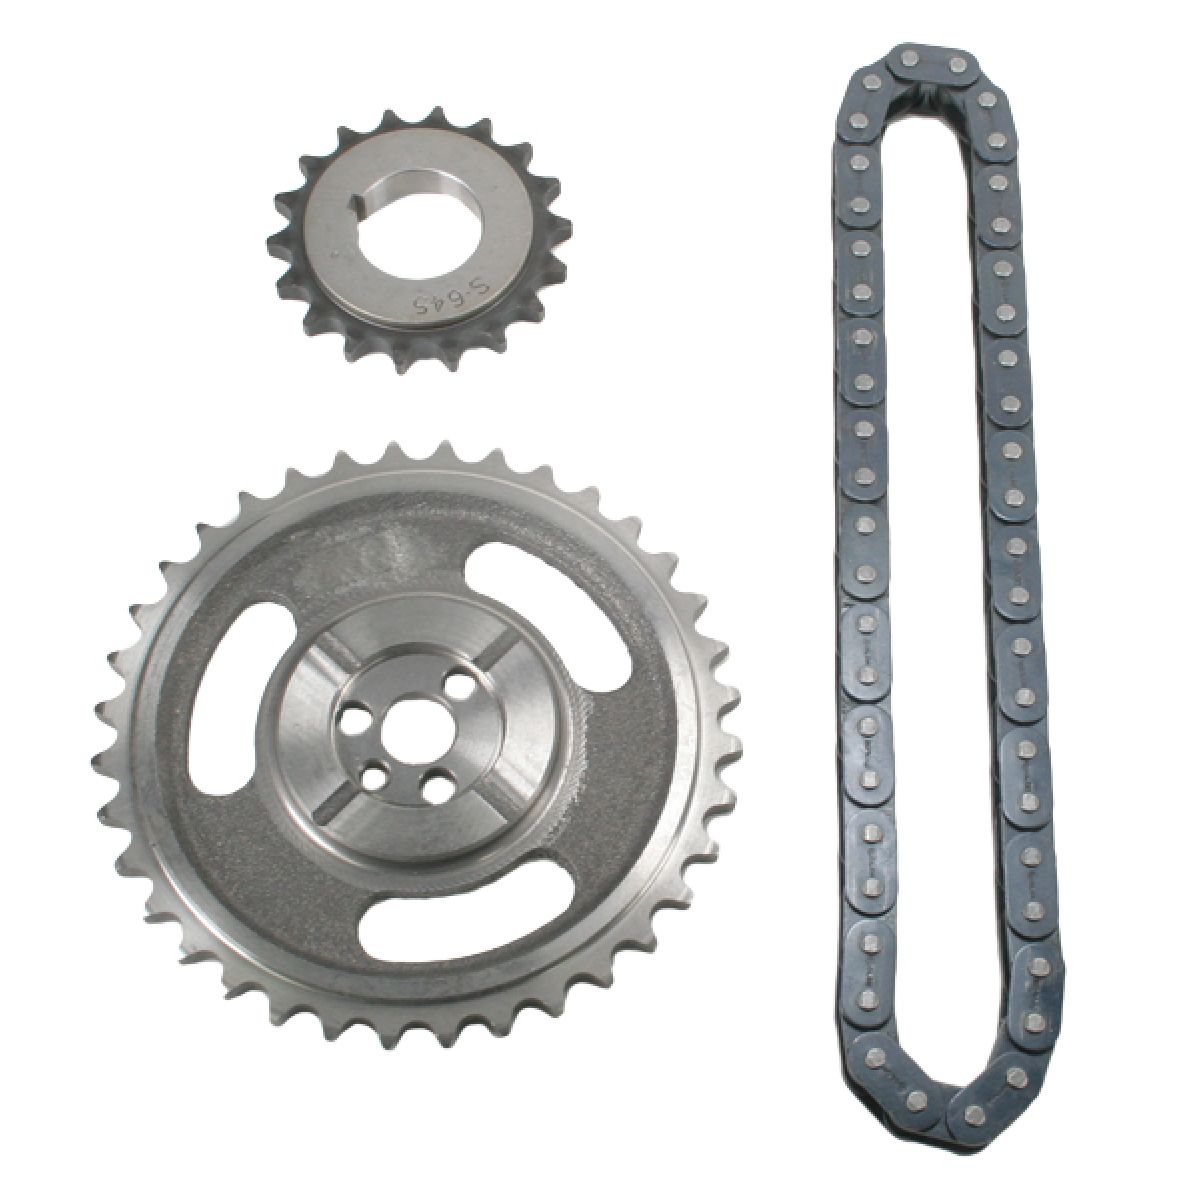 Roller Timing Chain & Gear Set Kit for Chevy GMC Cadillac | eBay